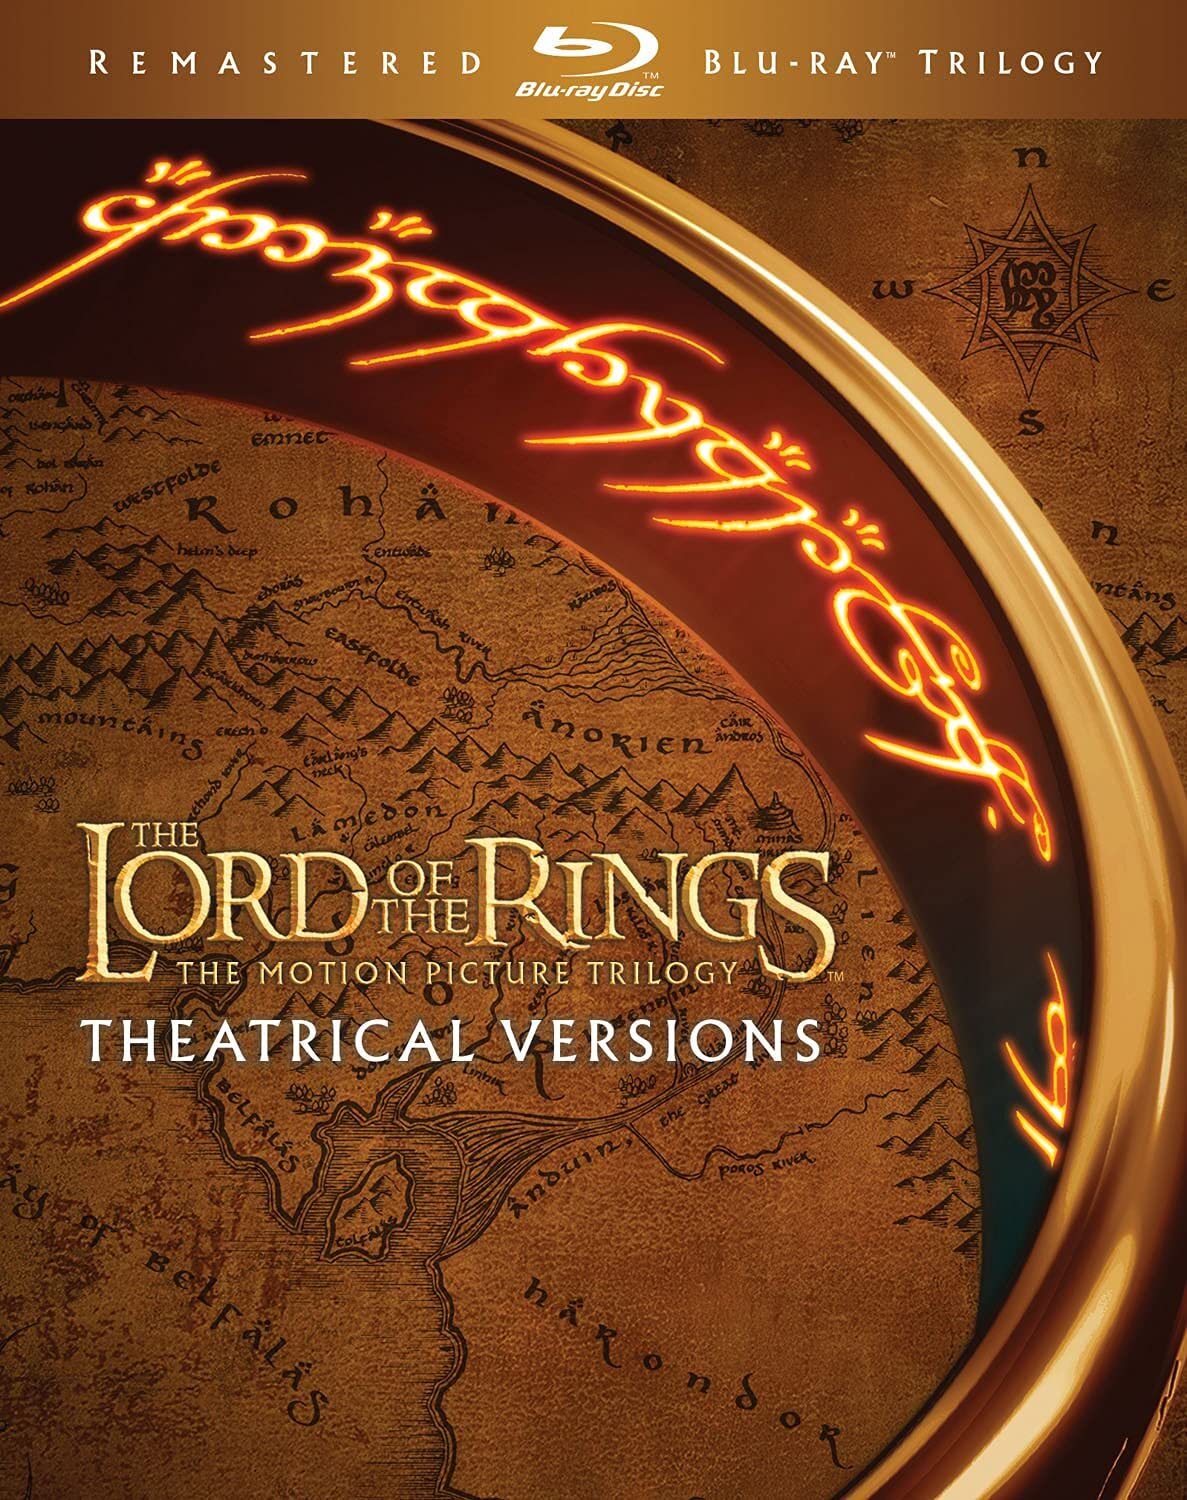 $11.99: The Lord of the Rings Film Trilogy: Remastered Theatrical Edition (Blu-ray)